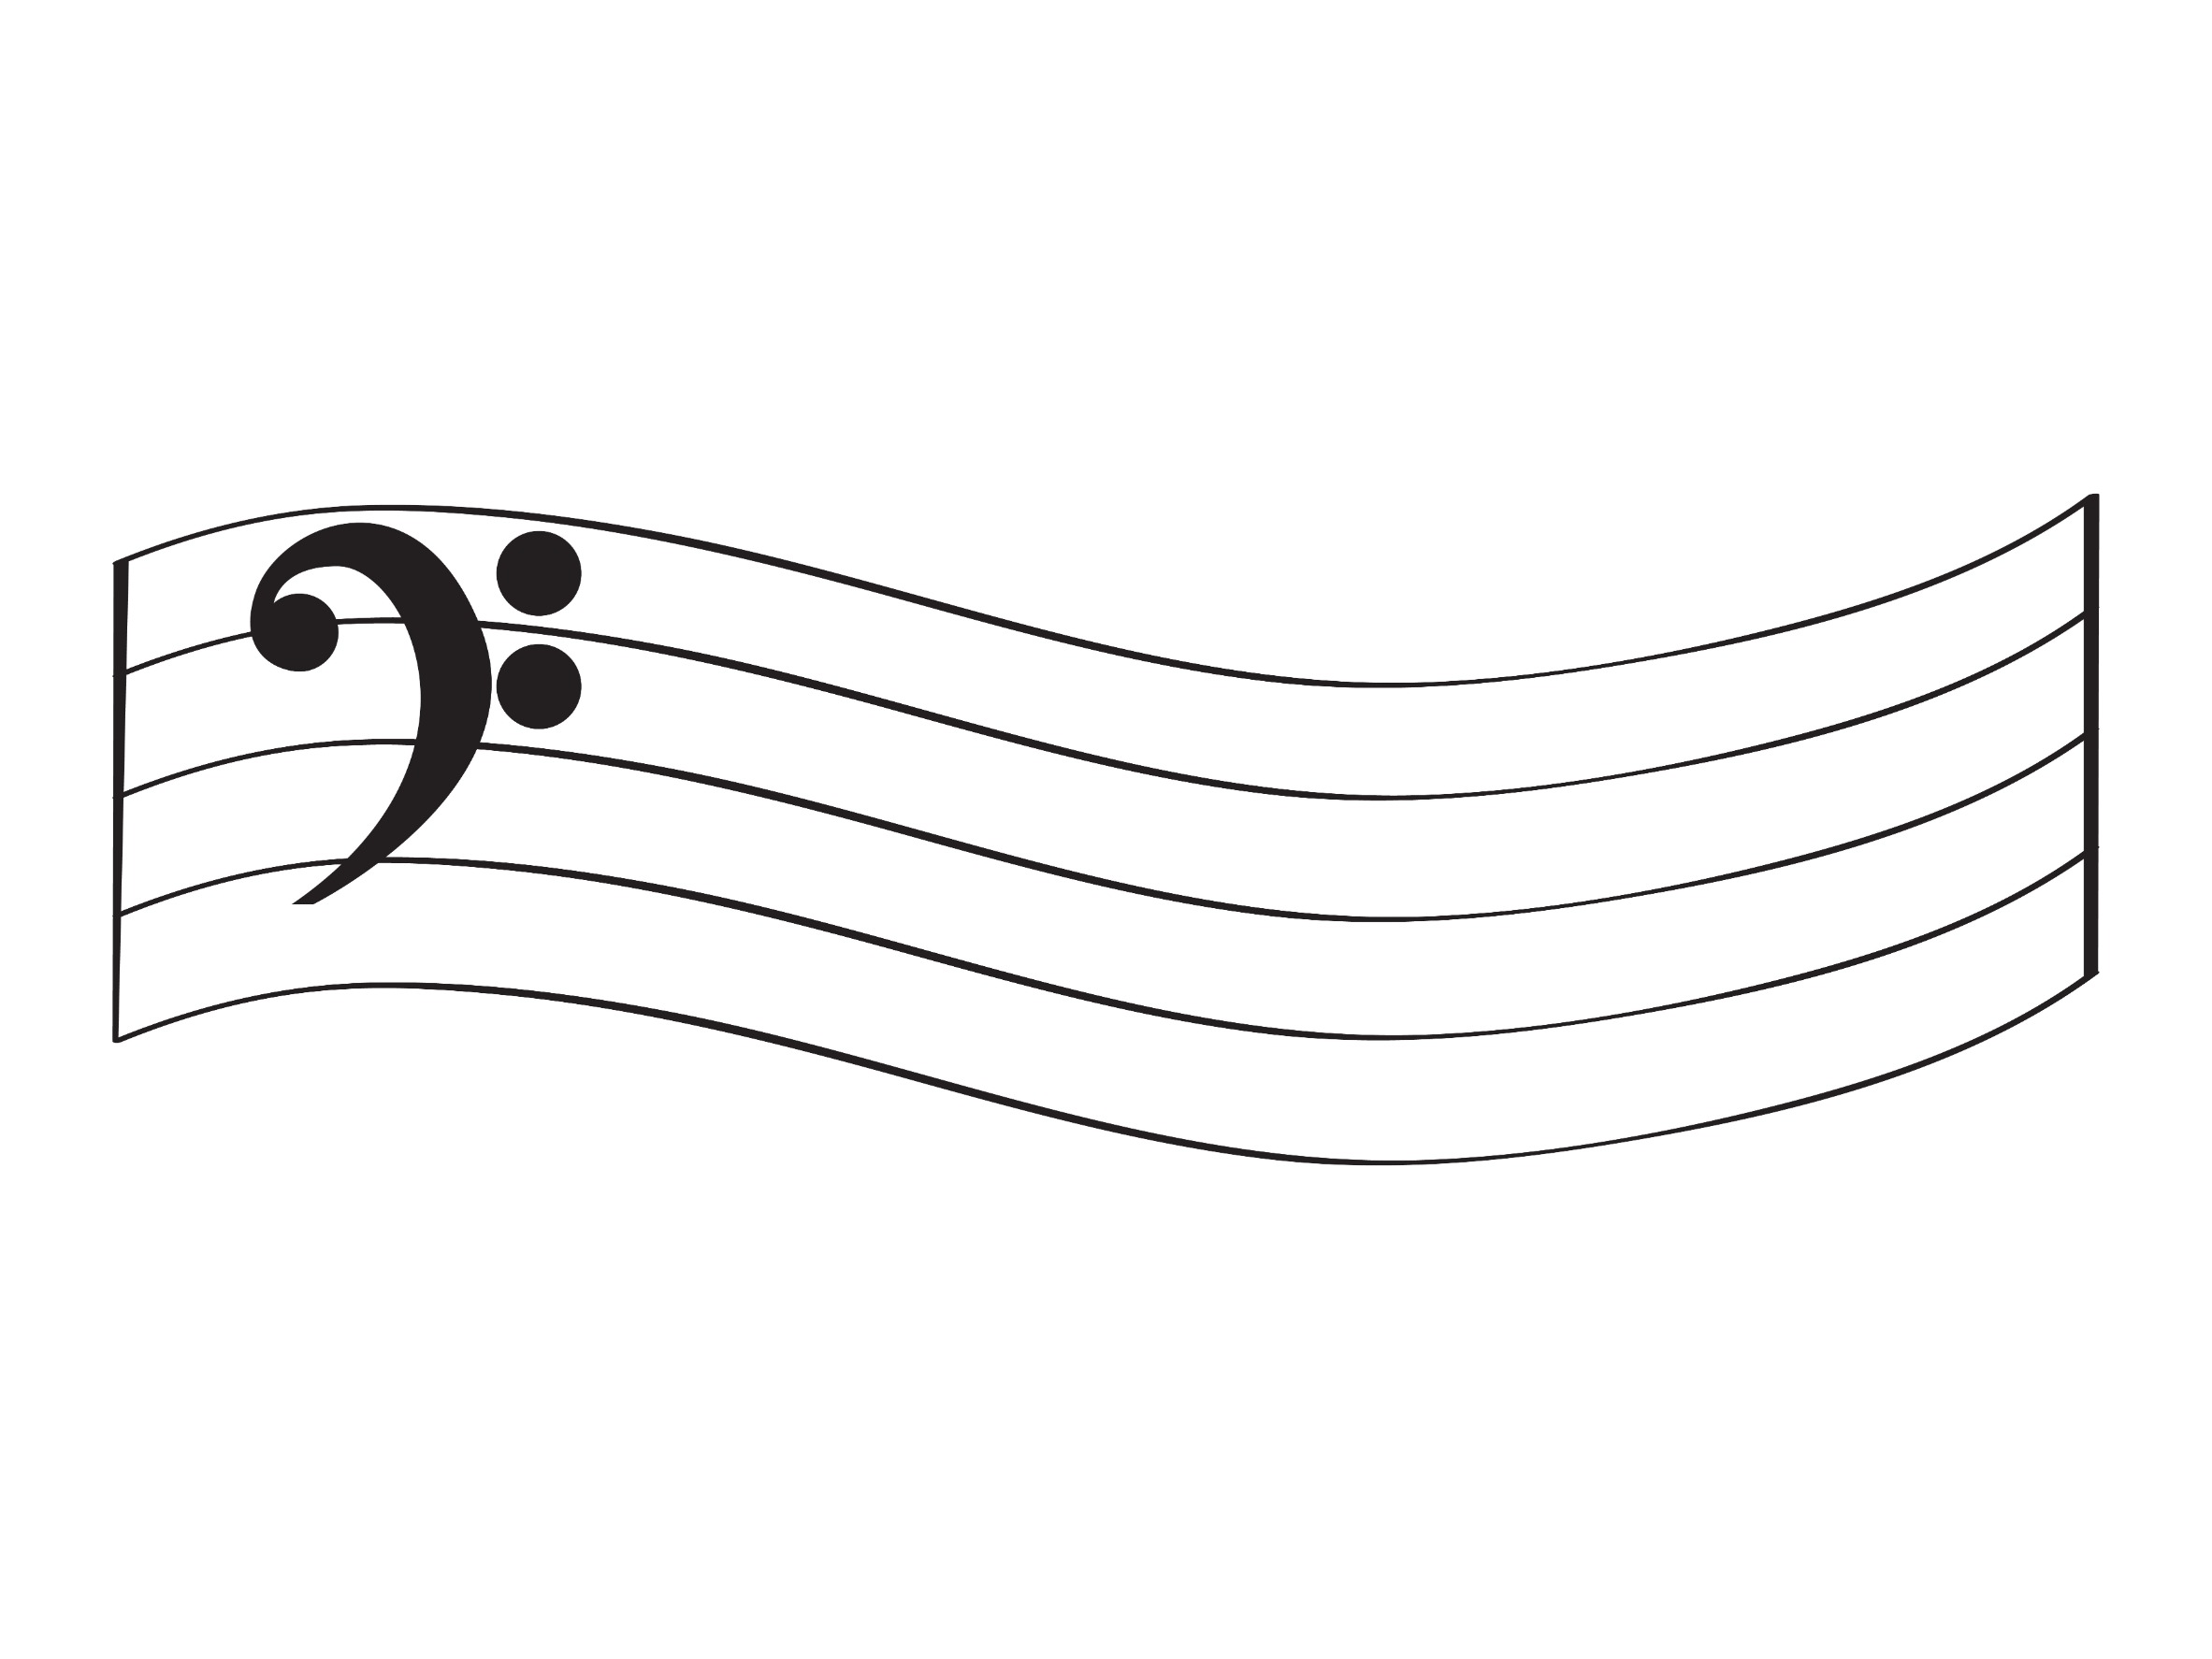 bass-clef-key-signatures-an-introduction